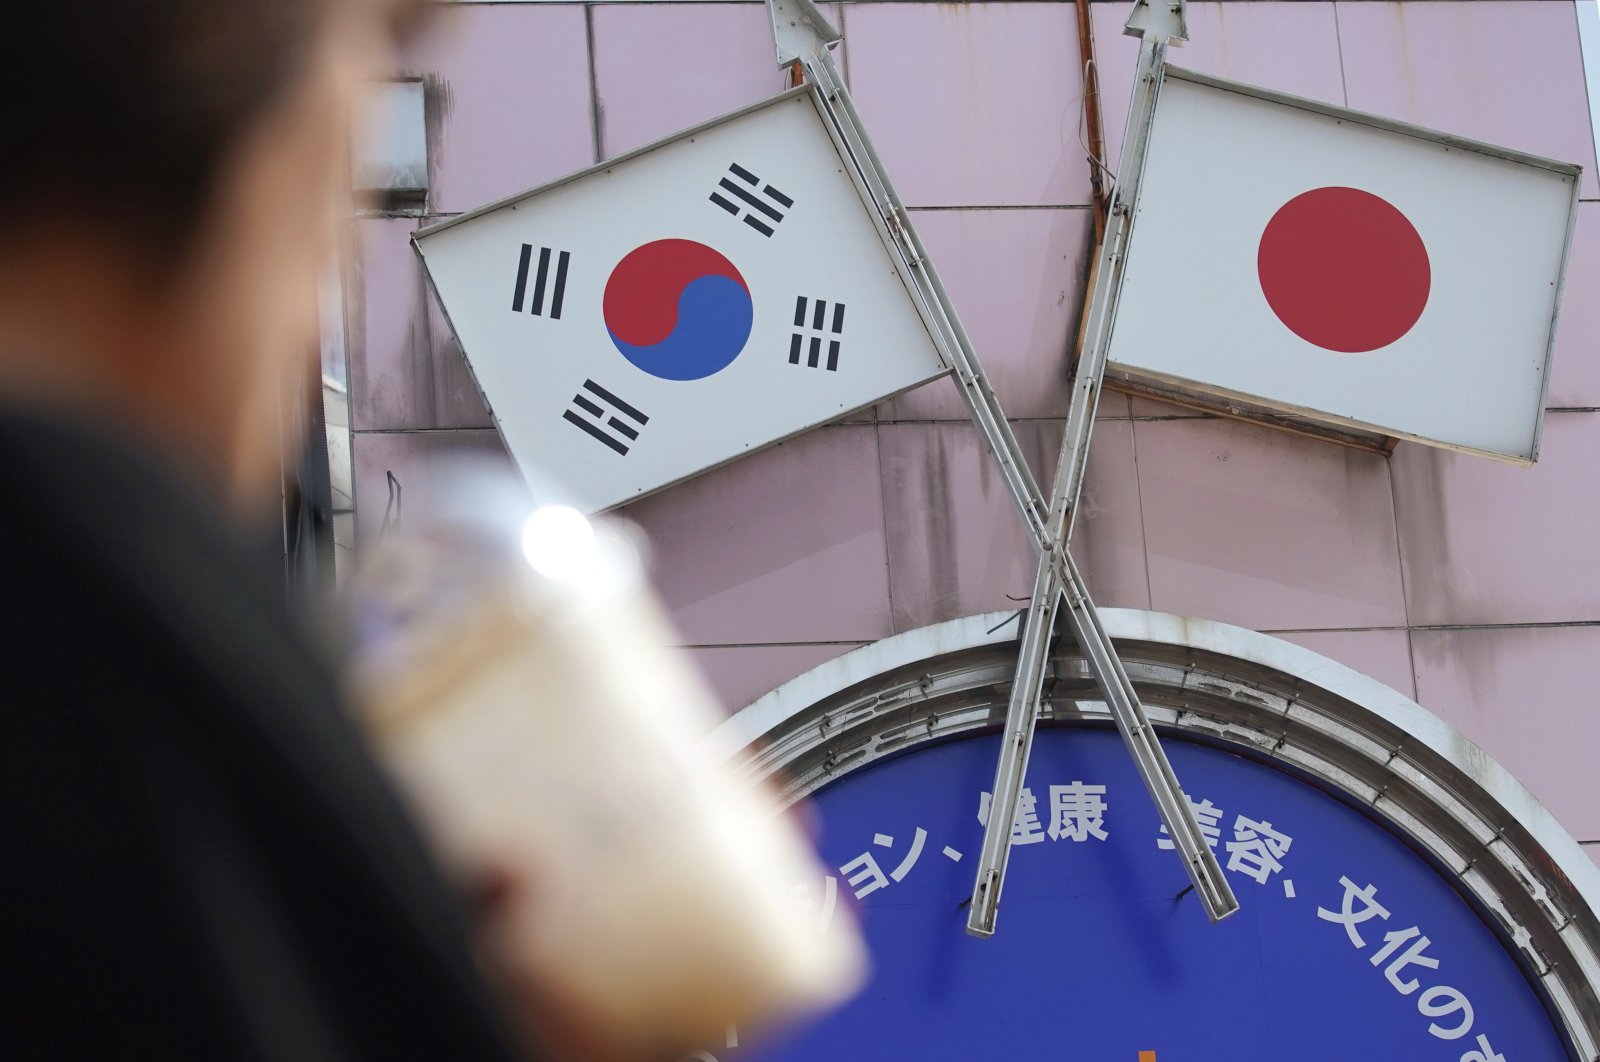 A woman walks past an advertisement featuring Japanese and South Korean flags at a shop in the Shin Okubo area in Tokyo, Japan, Aug. 2, 2019. (AP Photo)